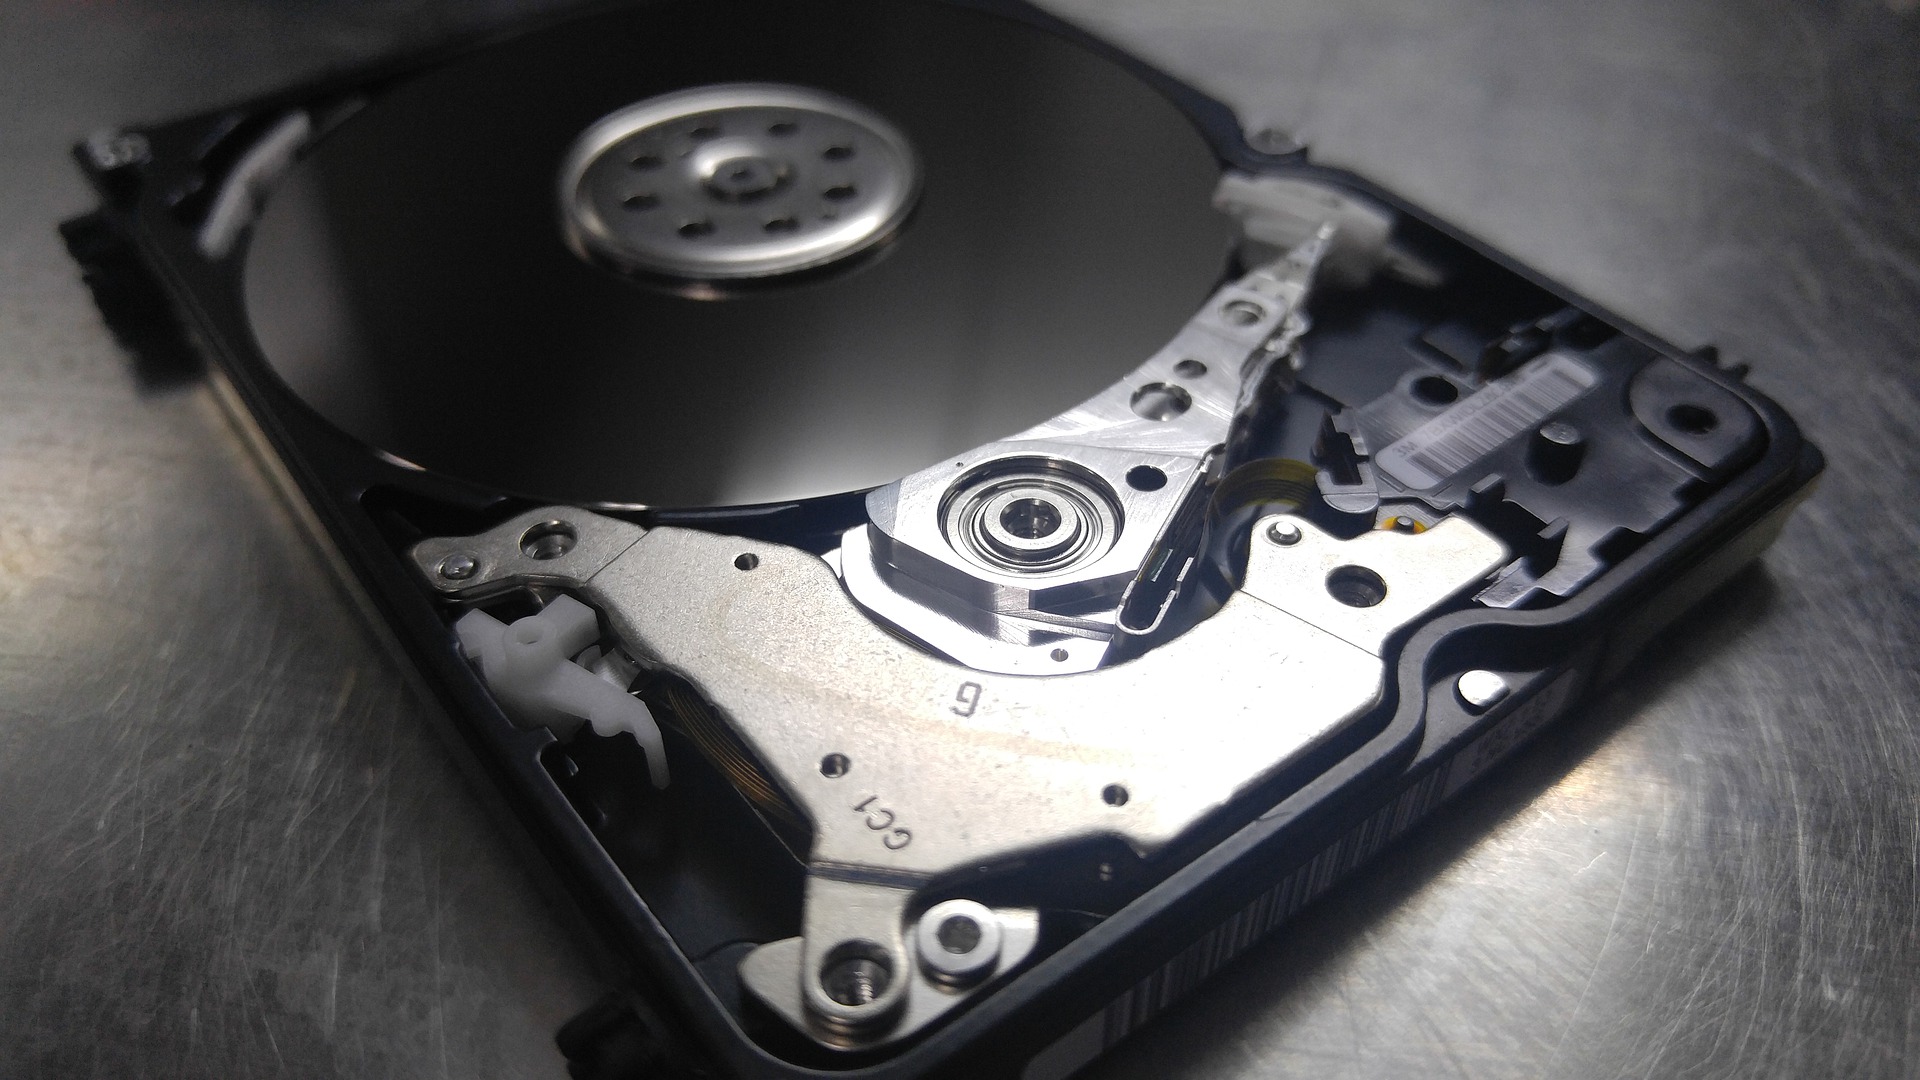 a close up of a hard drive on a table